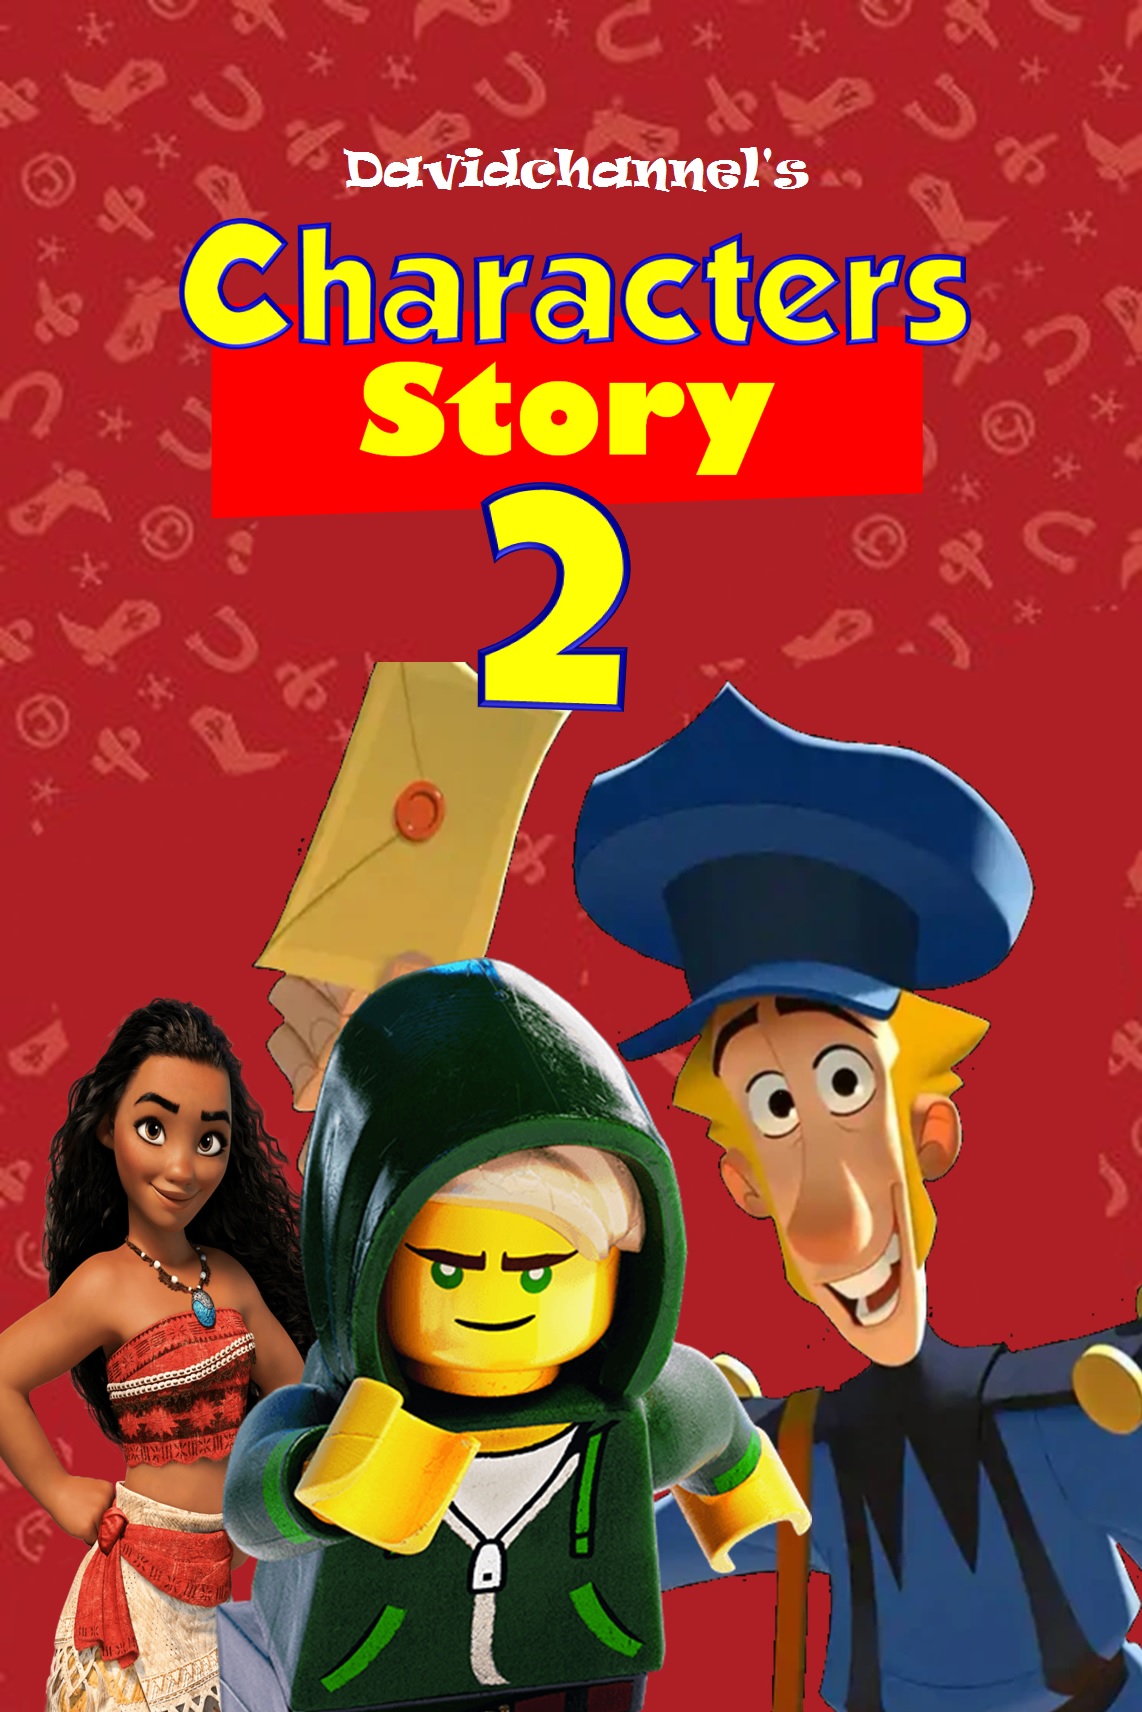 toy story 2 all characters